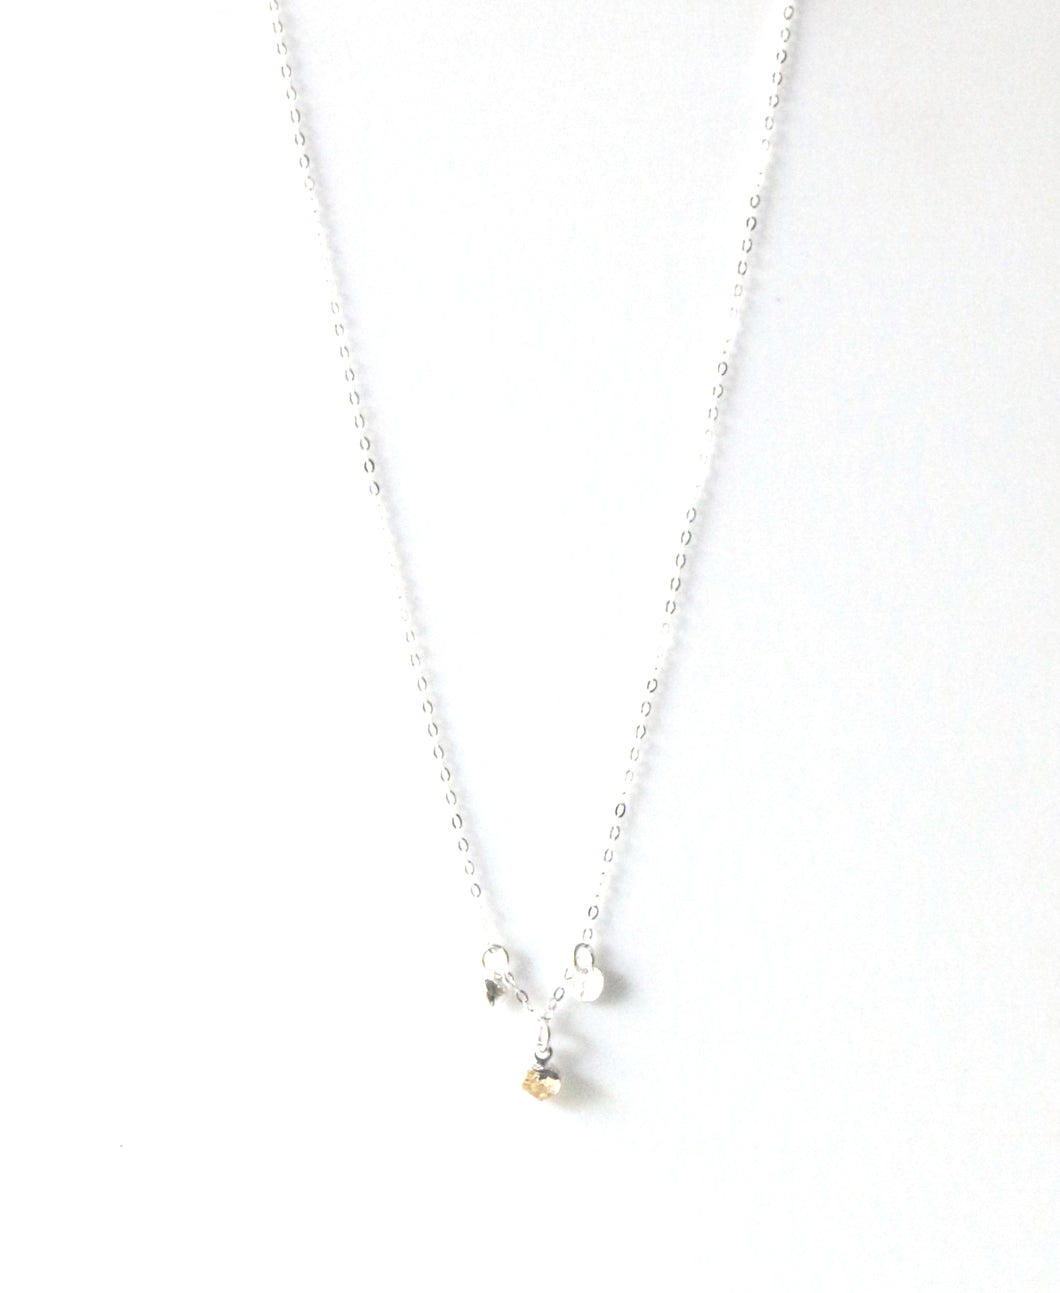 Sterling Silver Necklace with Citrine and Sterling Silver Charms